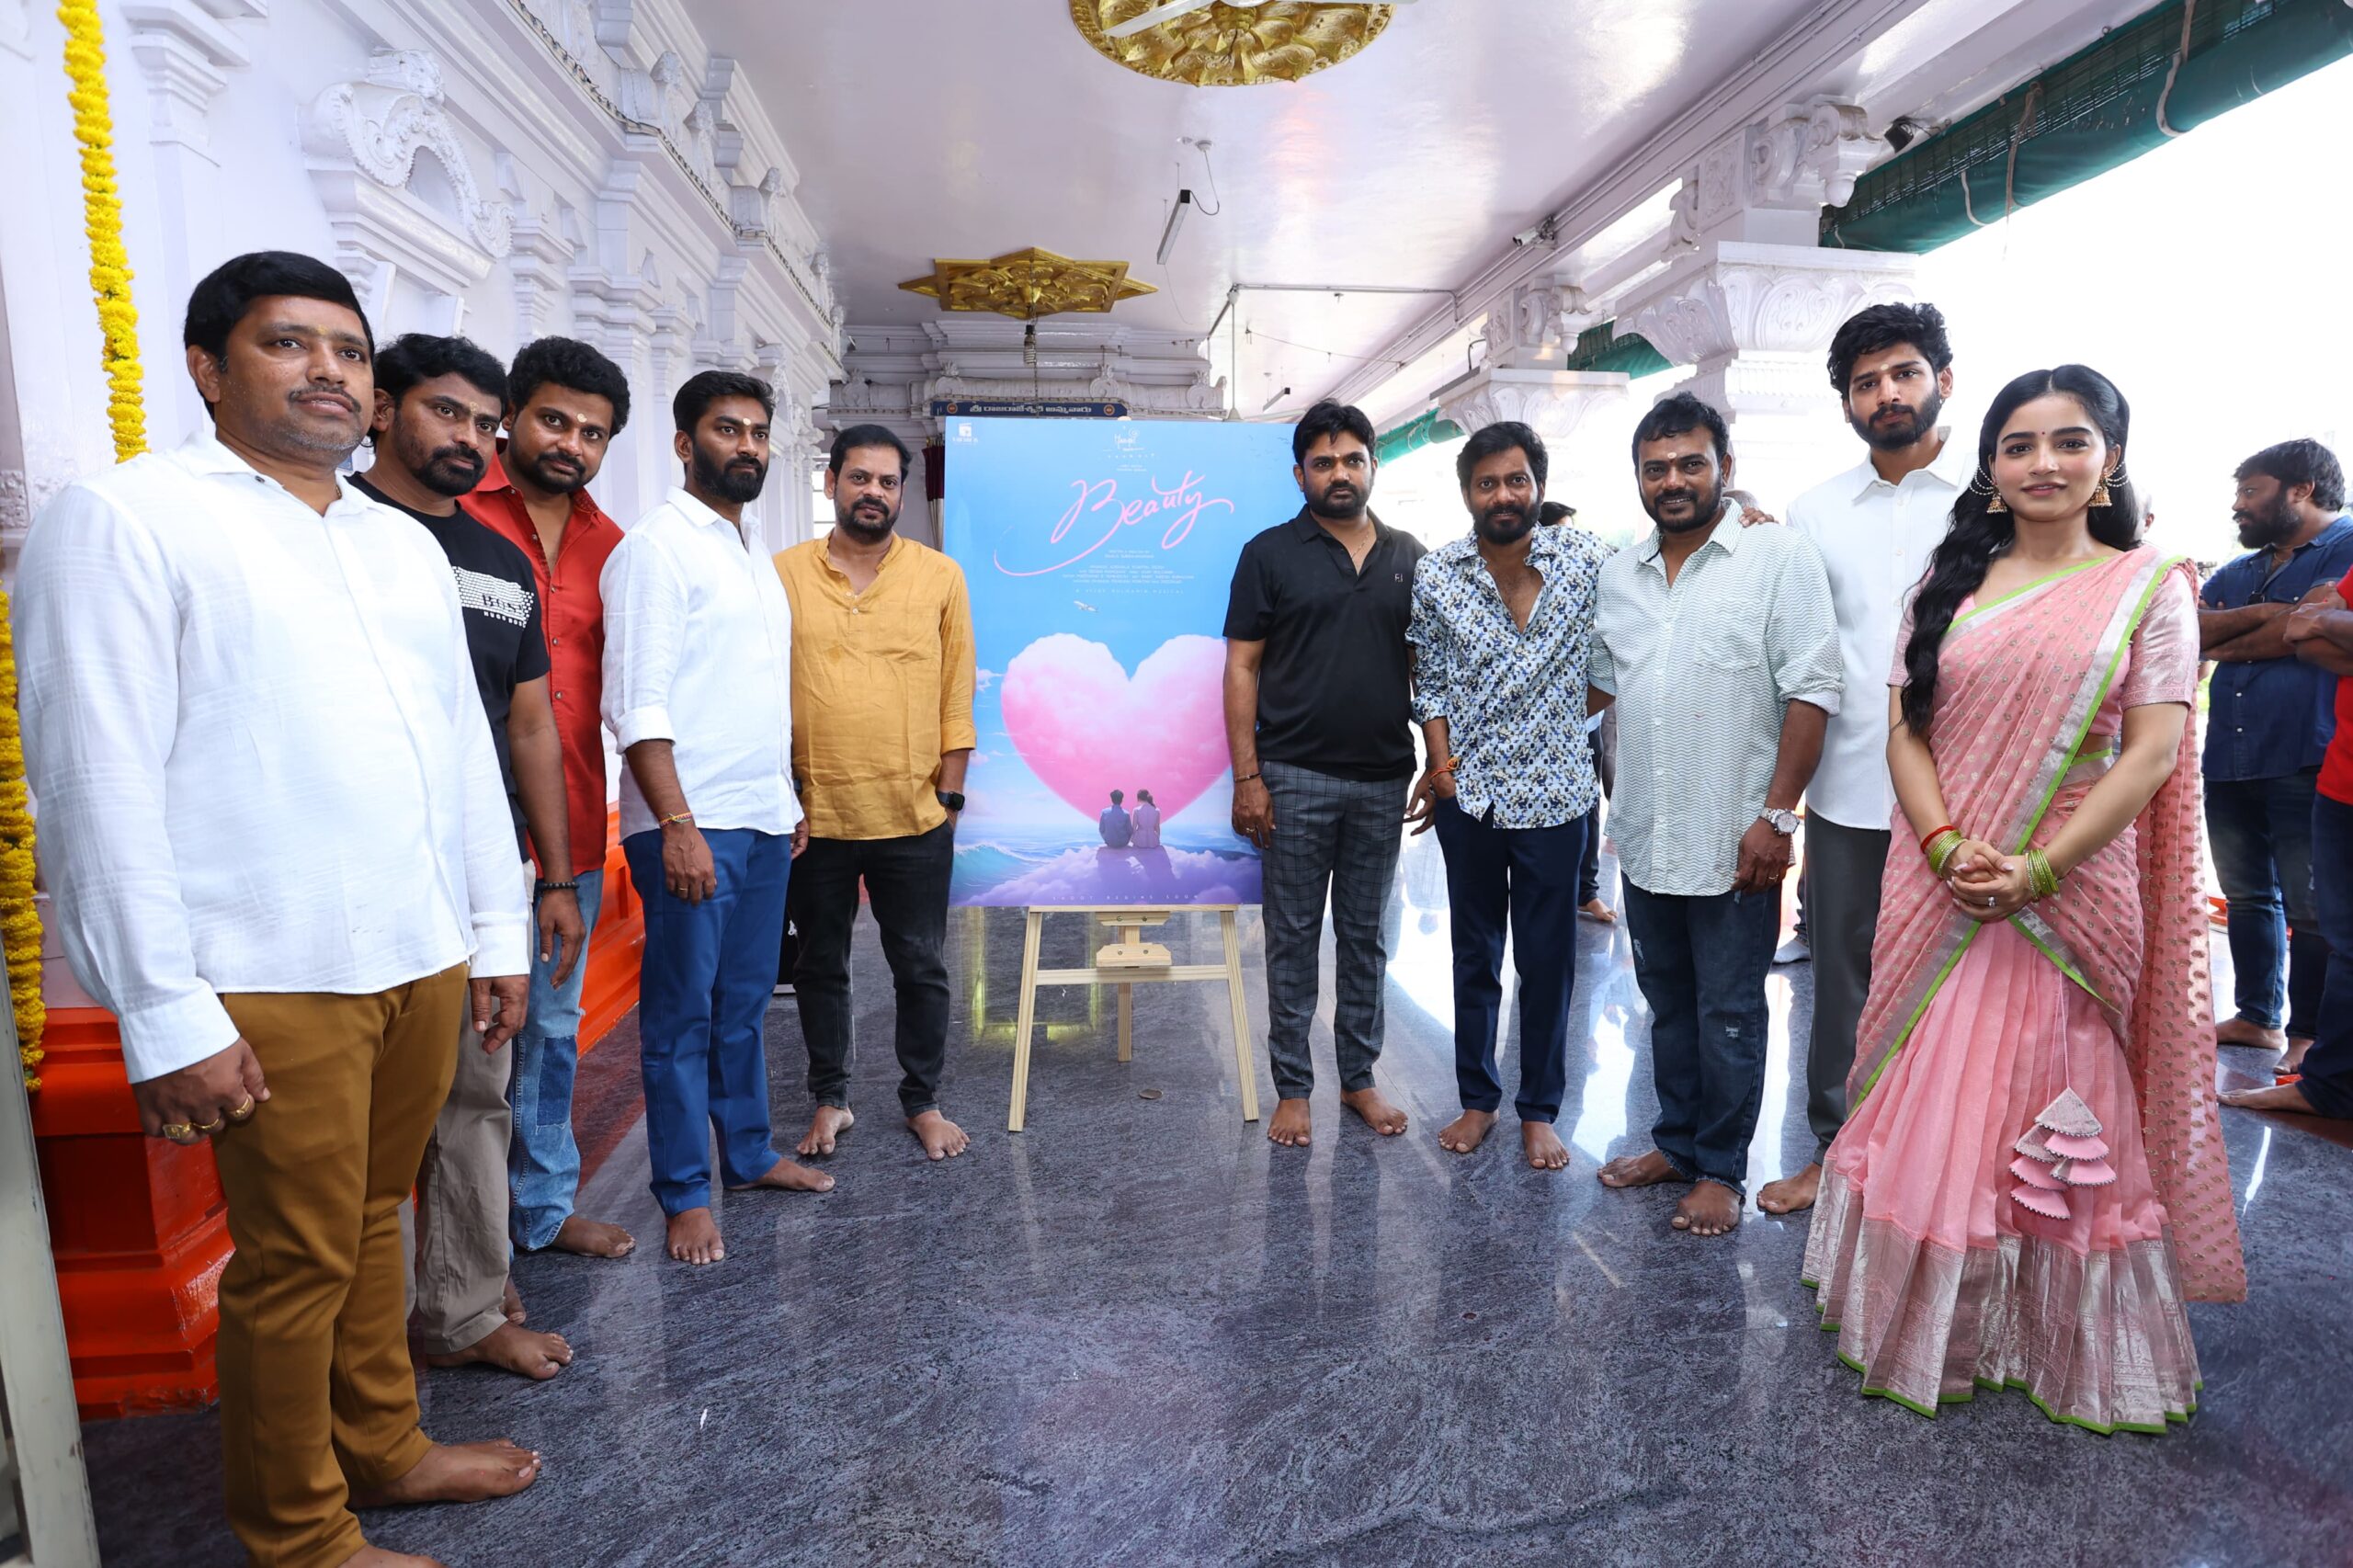 Beauty Movie Launched With Pooja Ceremony